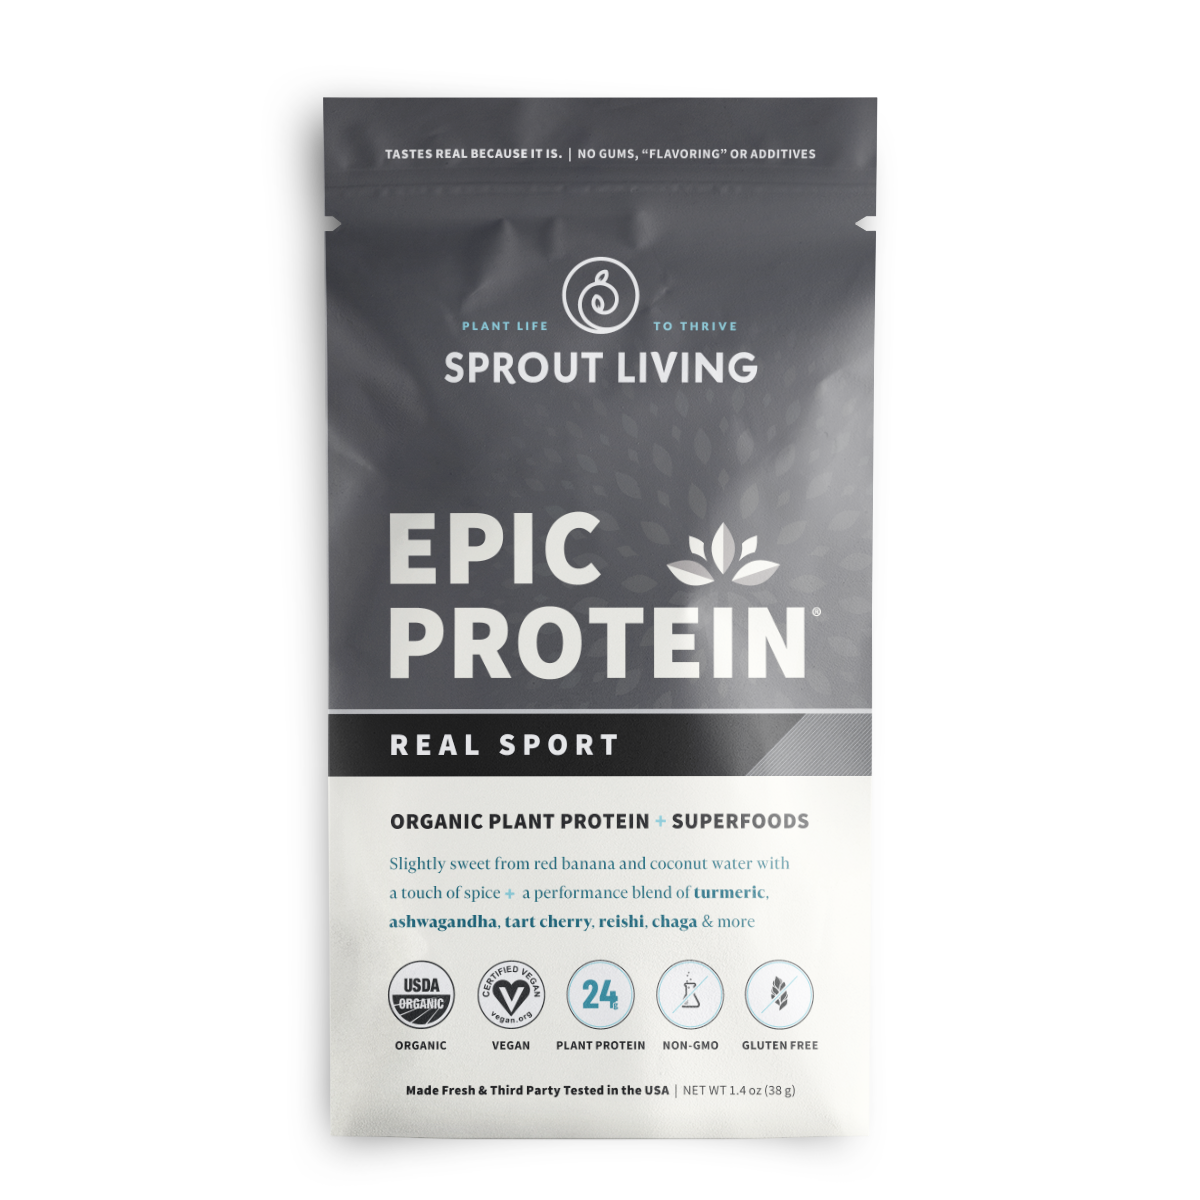 Epic Protein 38g / Real Sport